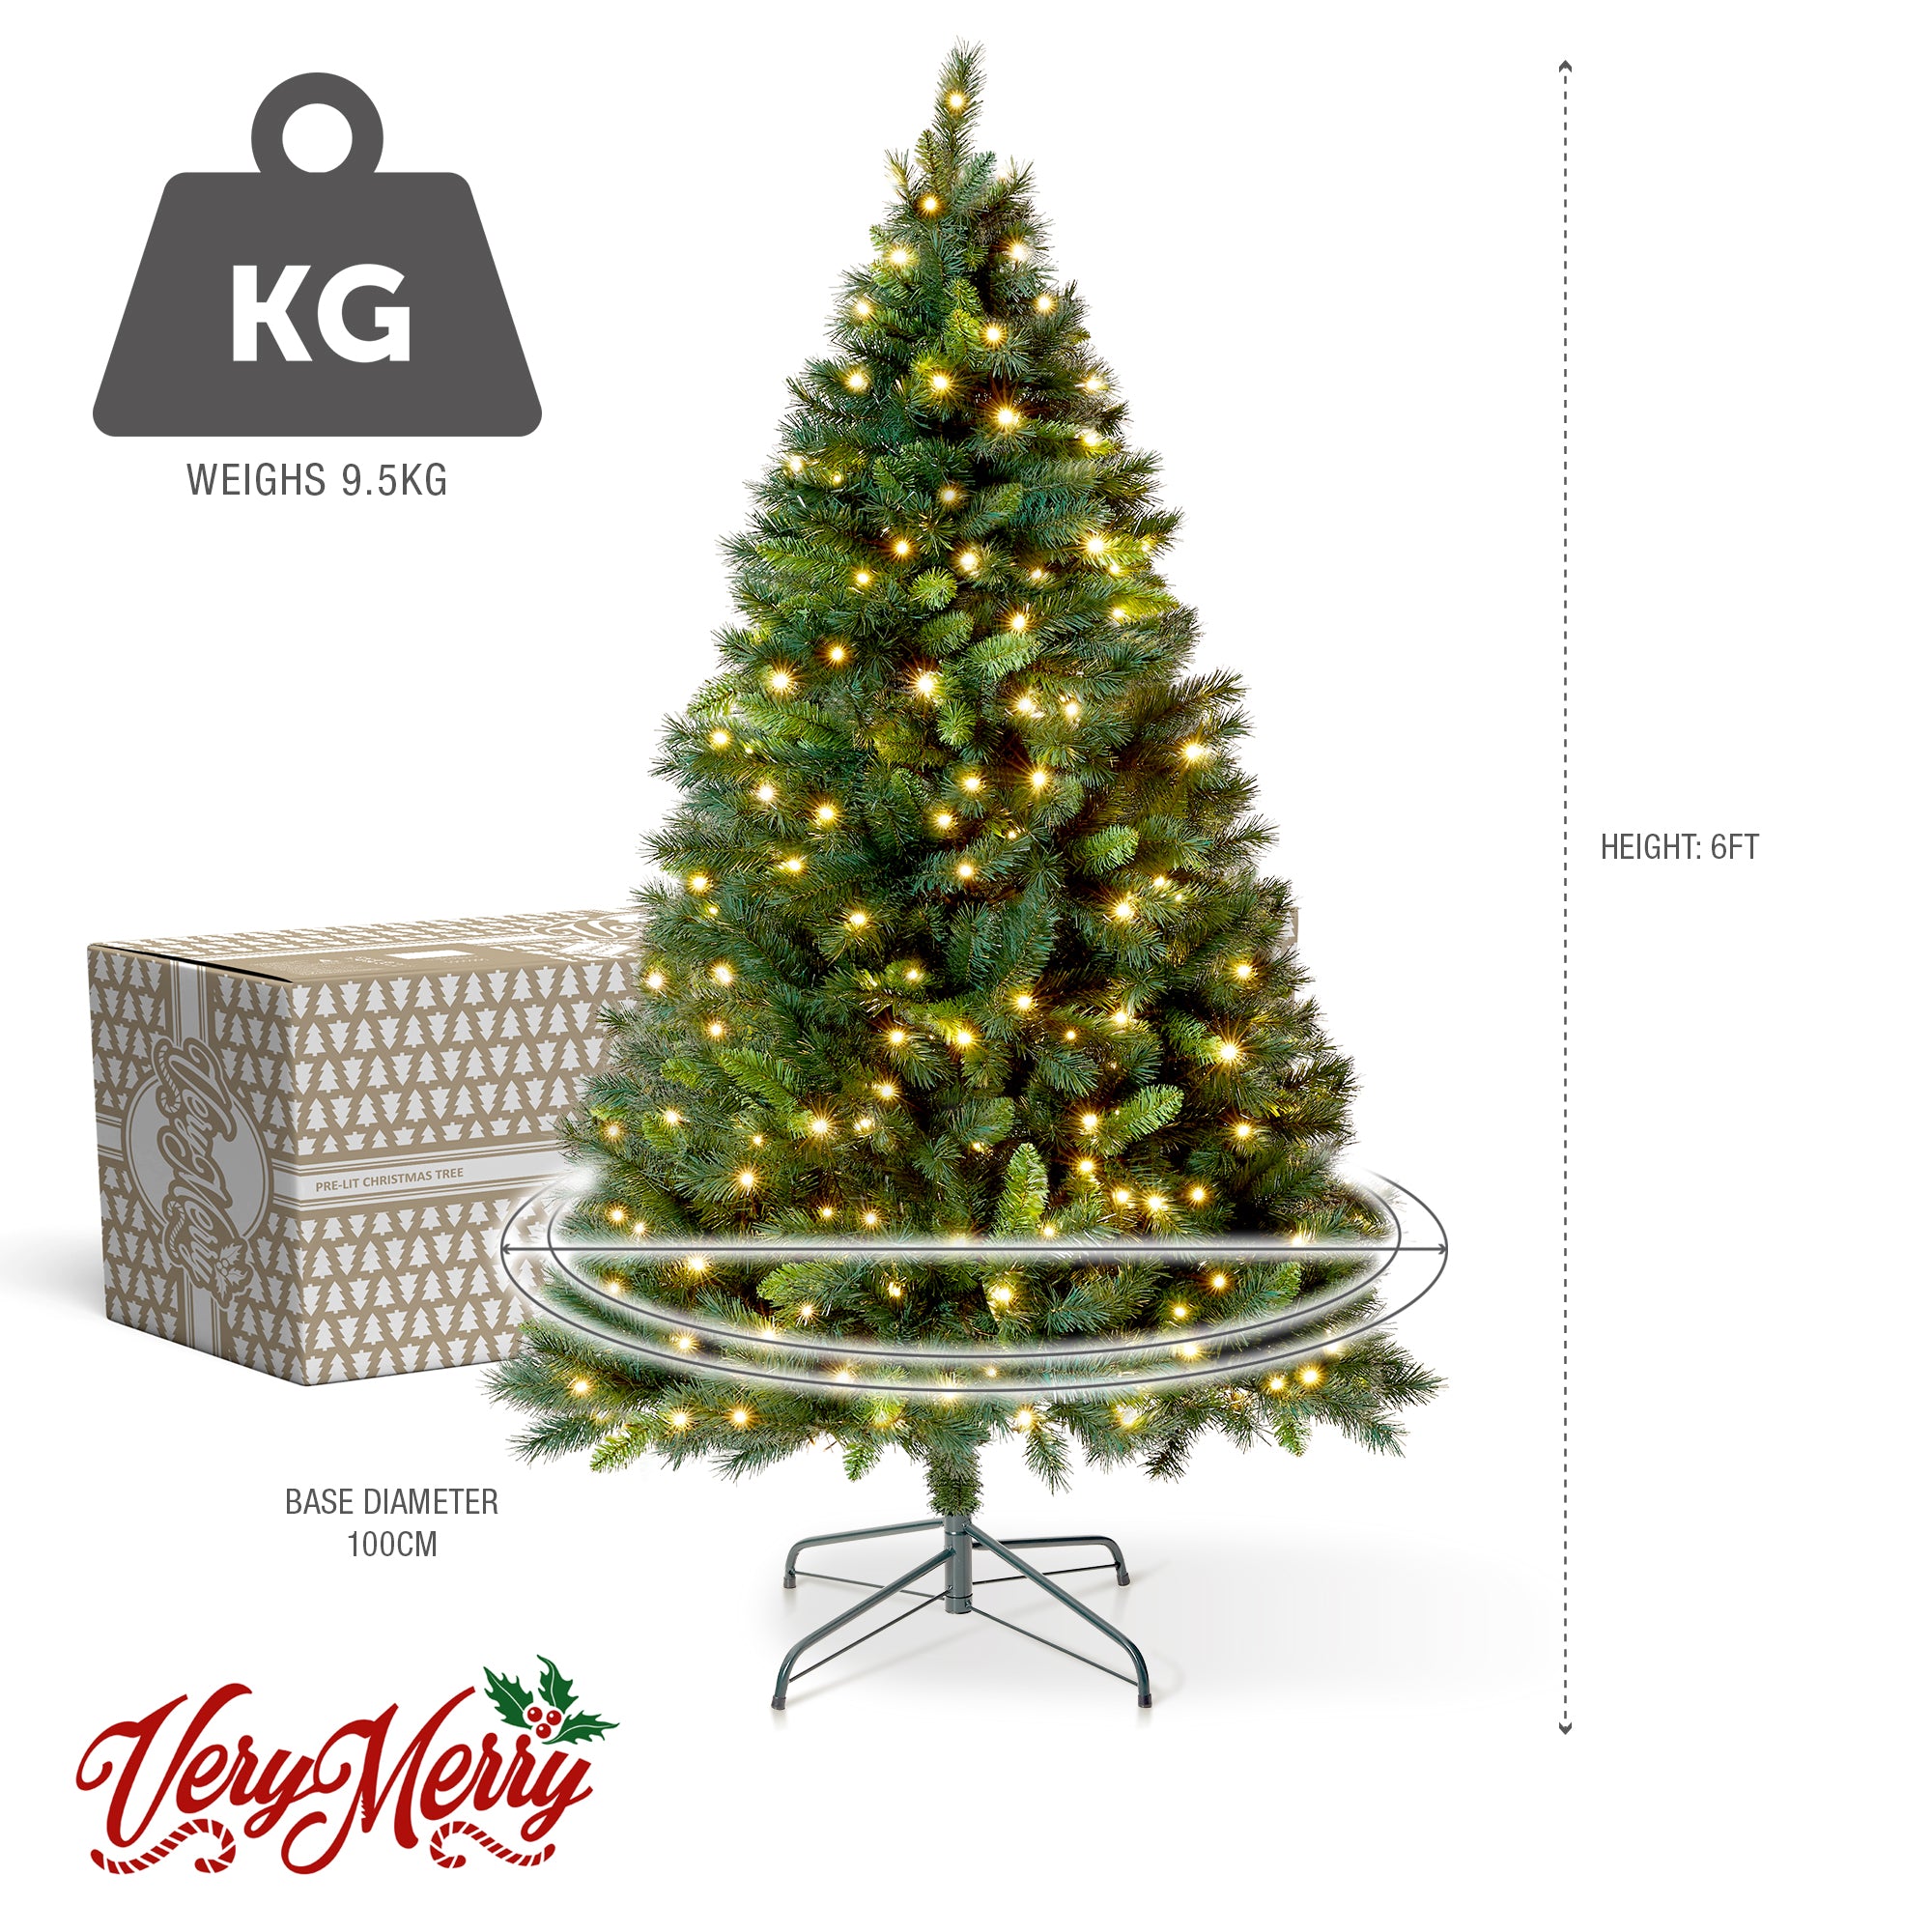 VeryMerry 6FT 'Snowhill' Pre Lit Christmas Tree with 300 Built-In Warm White LED Lights with Auto-Off Timer, 8 Lighting Modes and Foldable Metal Stand